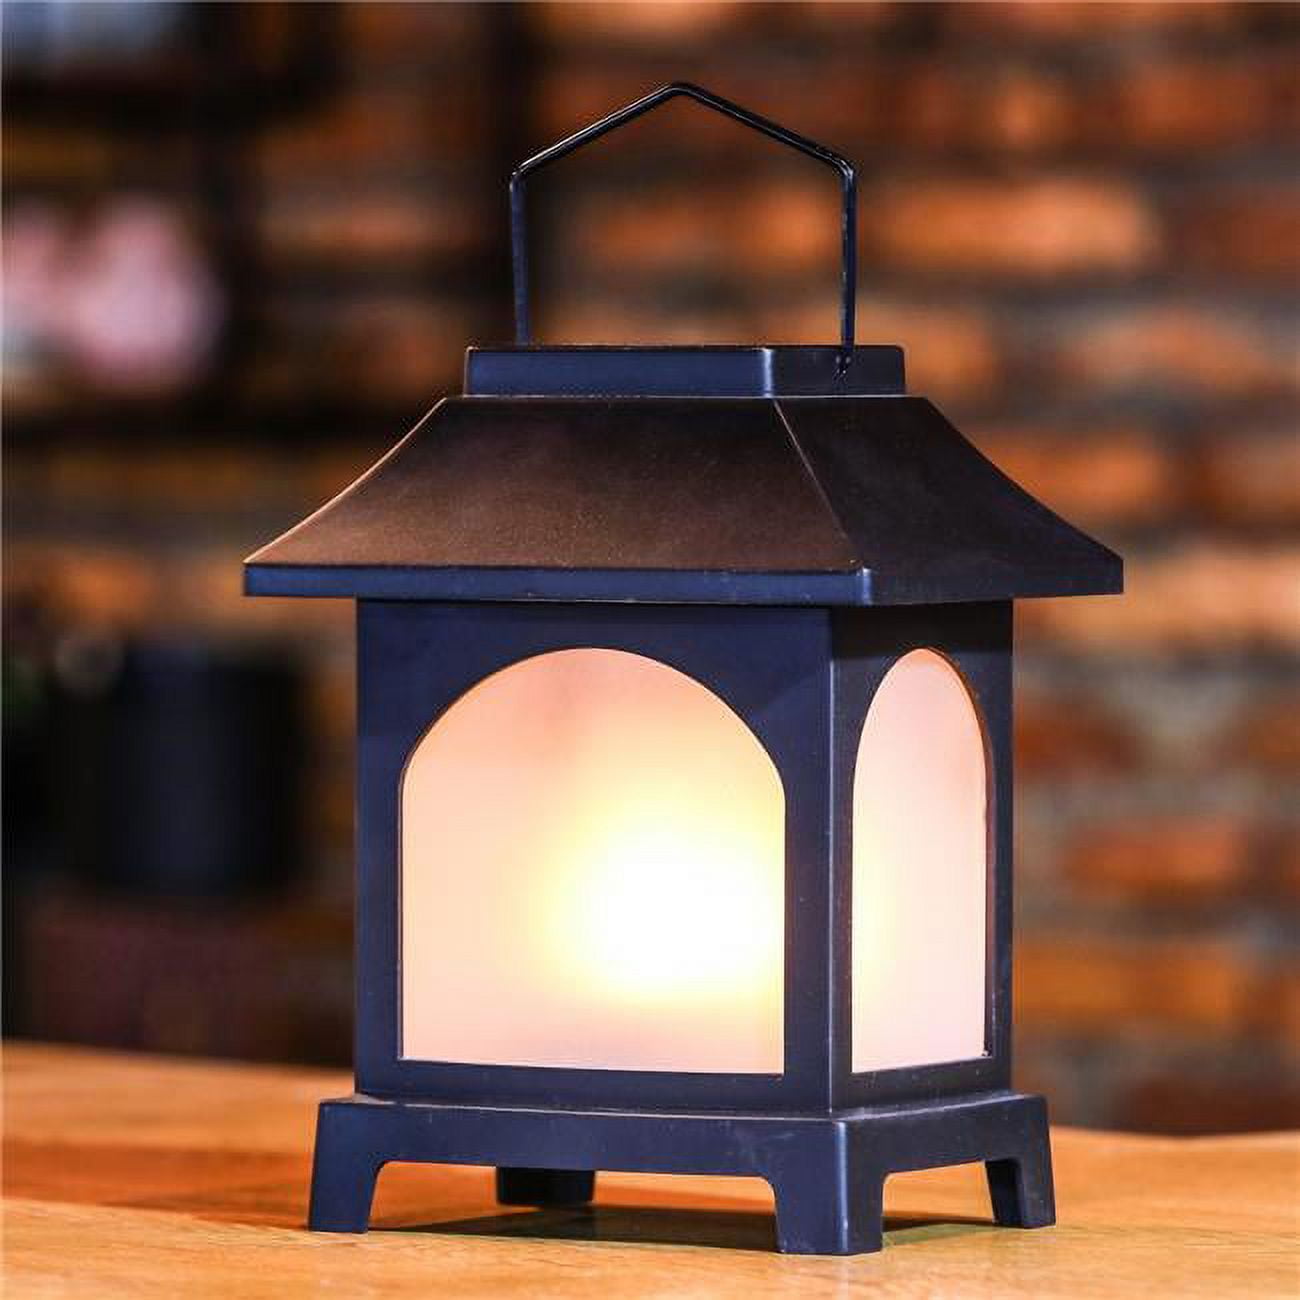 Walbest Retro Flameless Christmas LED Storm Lantern, Warm White Light  Battery Operated Pony Lantern, Antique PP Hanging Lantern with Batteries,  for